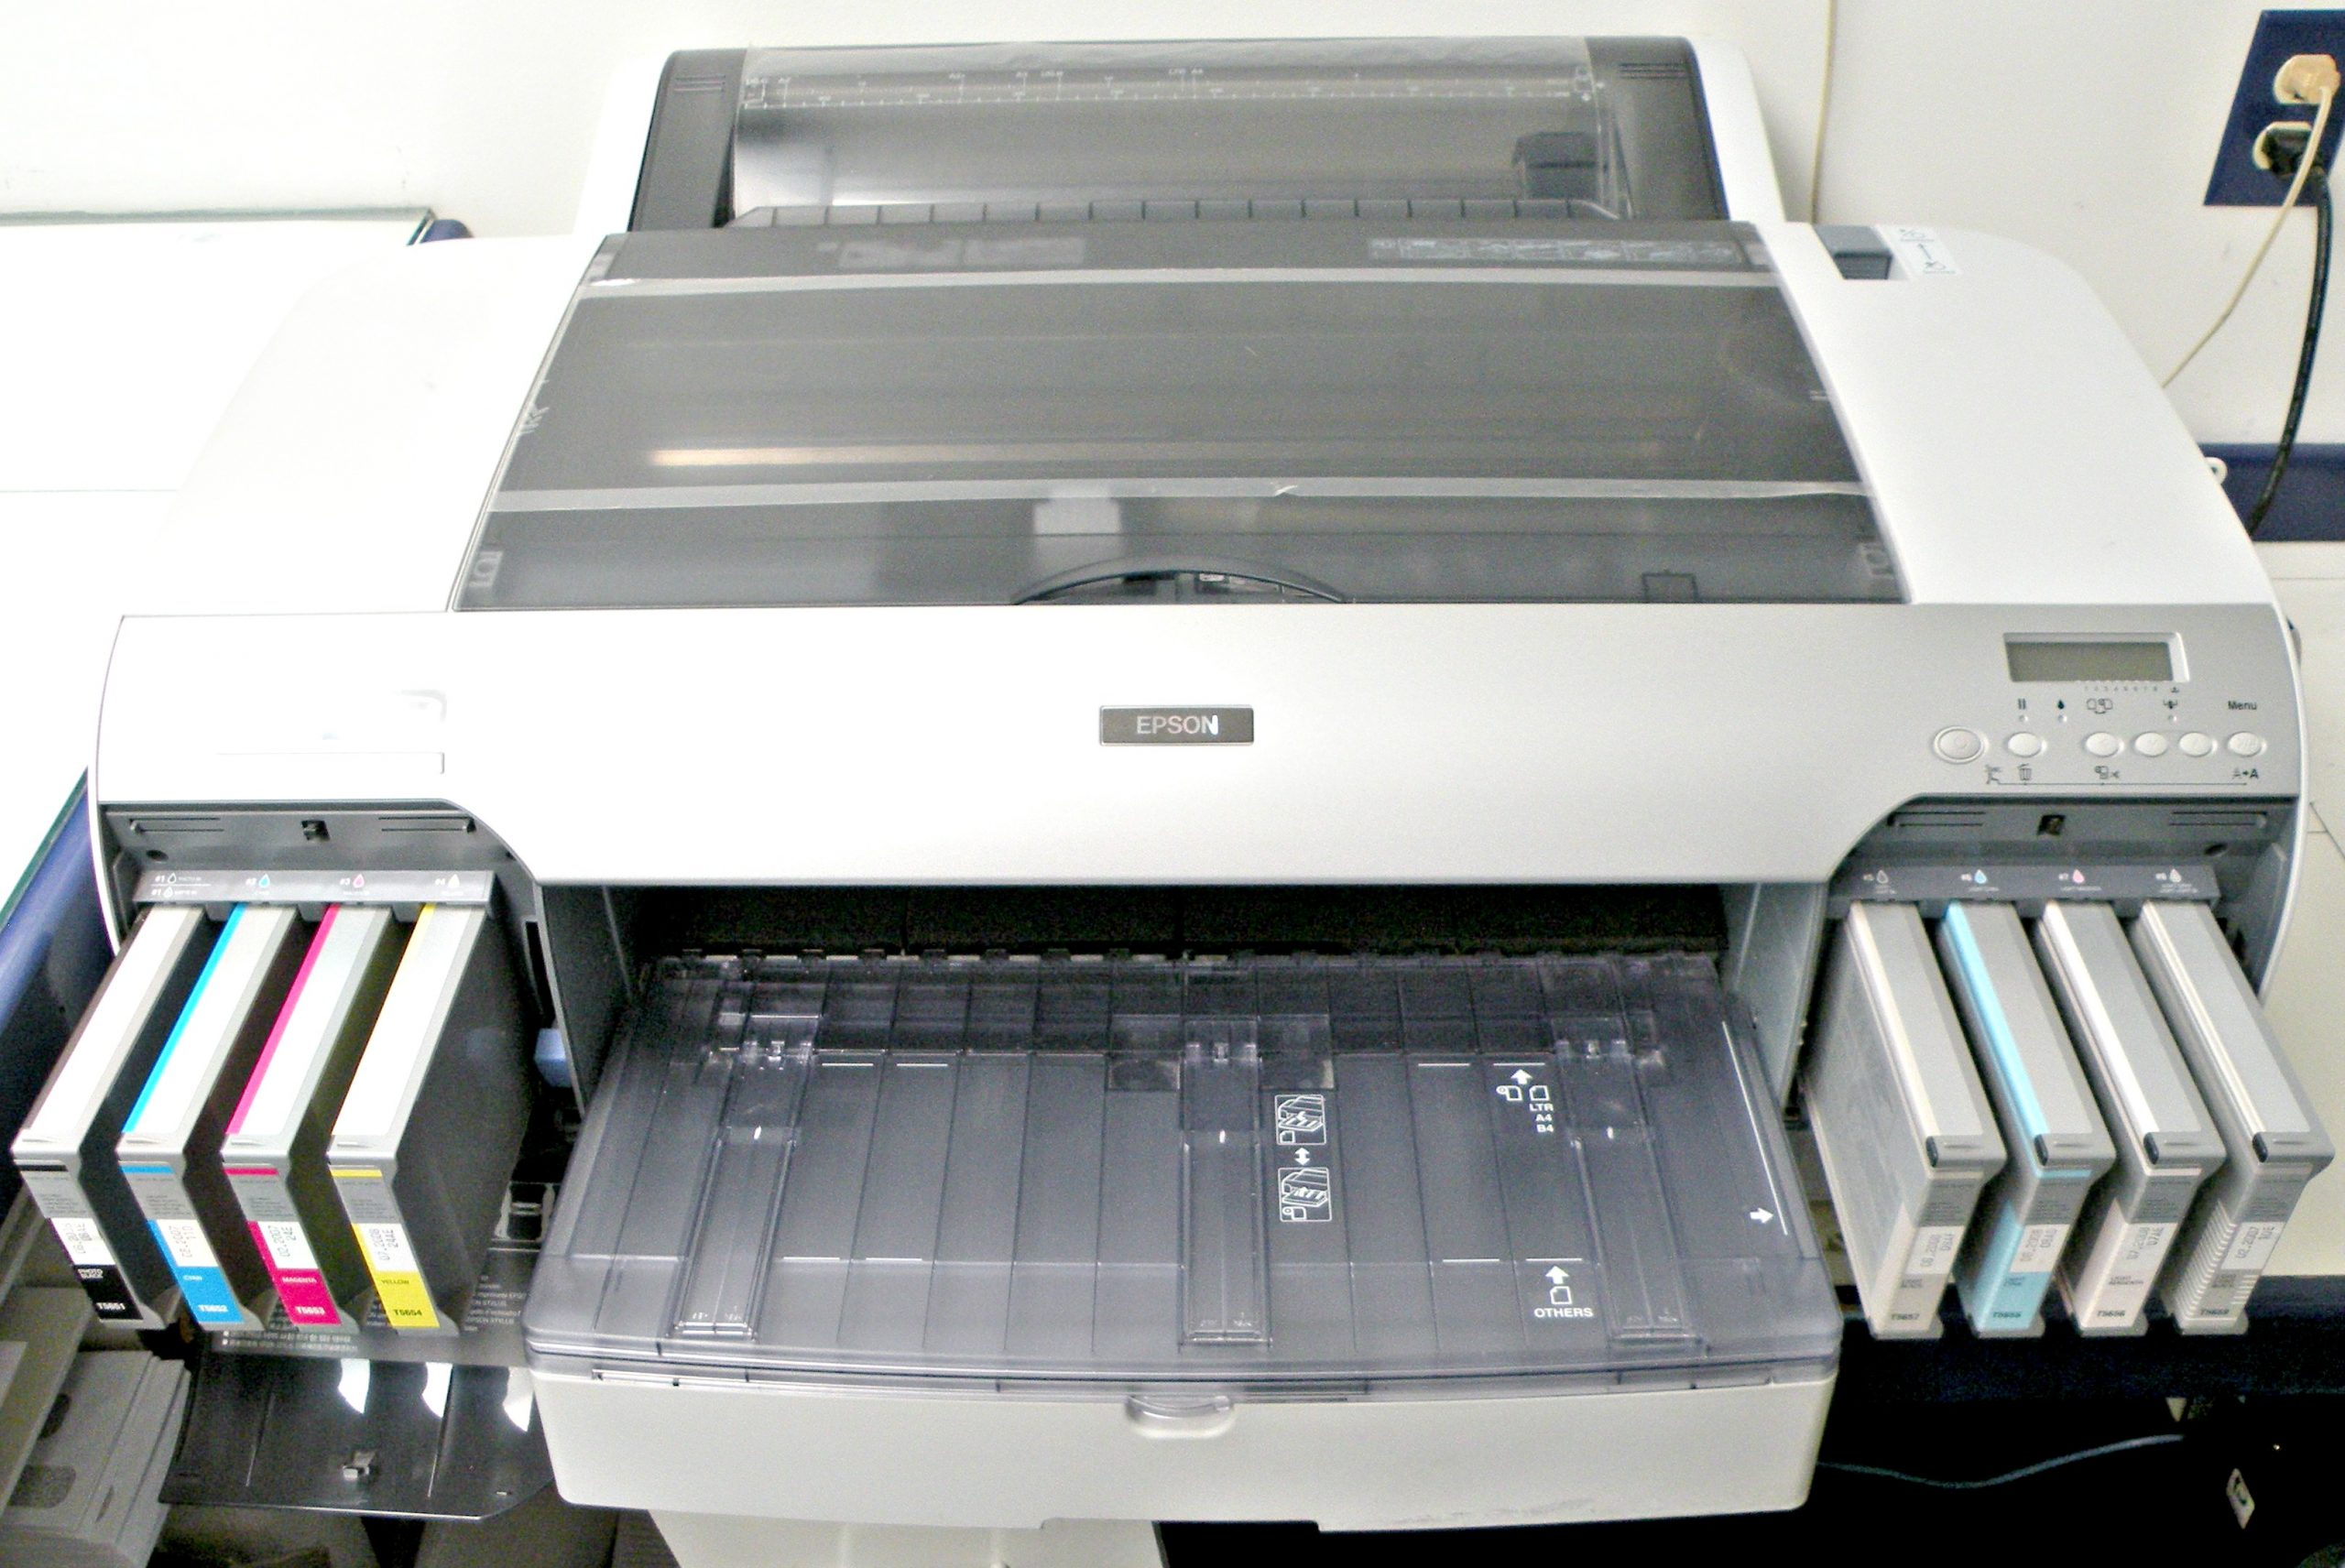 Epson Stylus Pro 4800 K122A 17″ Color Printer (used) Item # UPE-13 (NY)